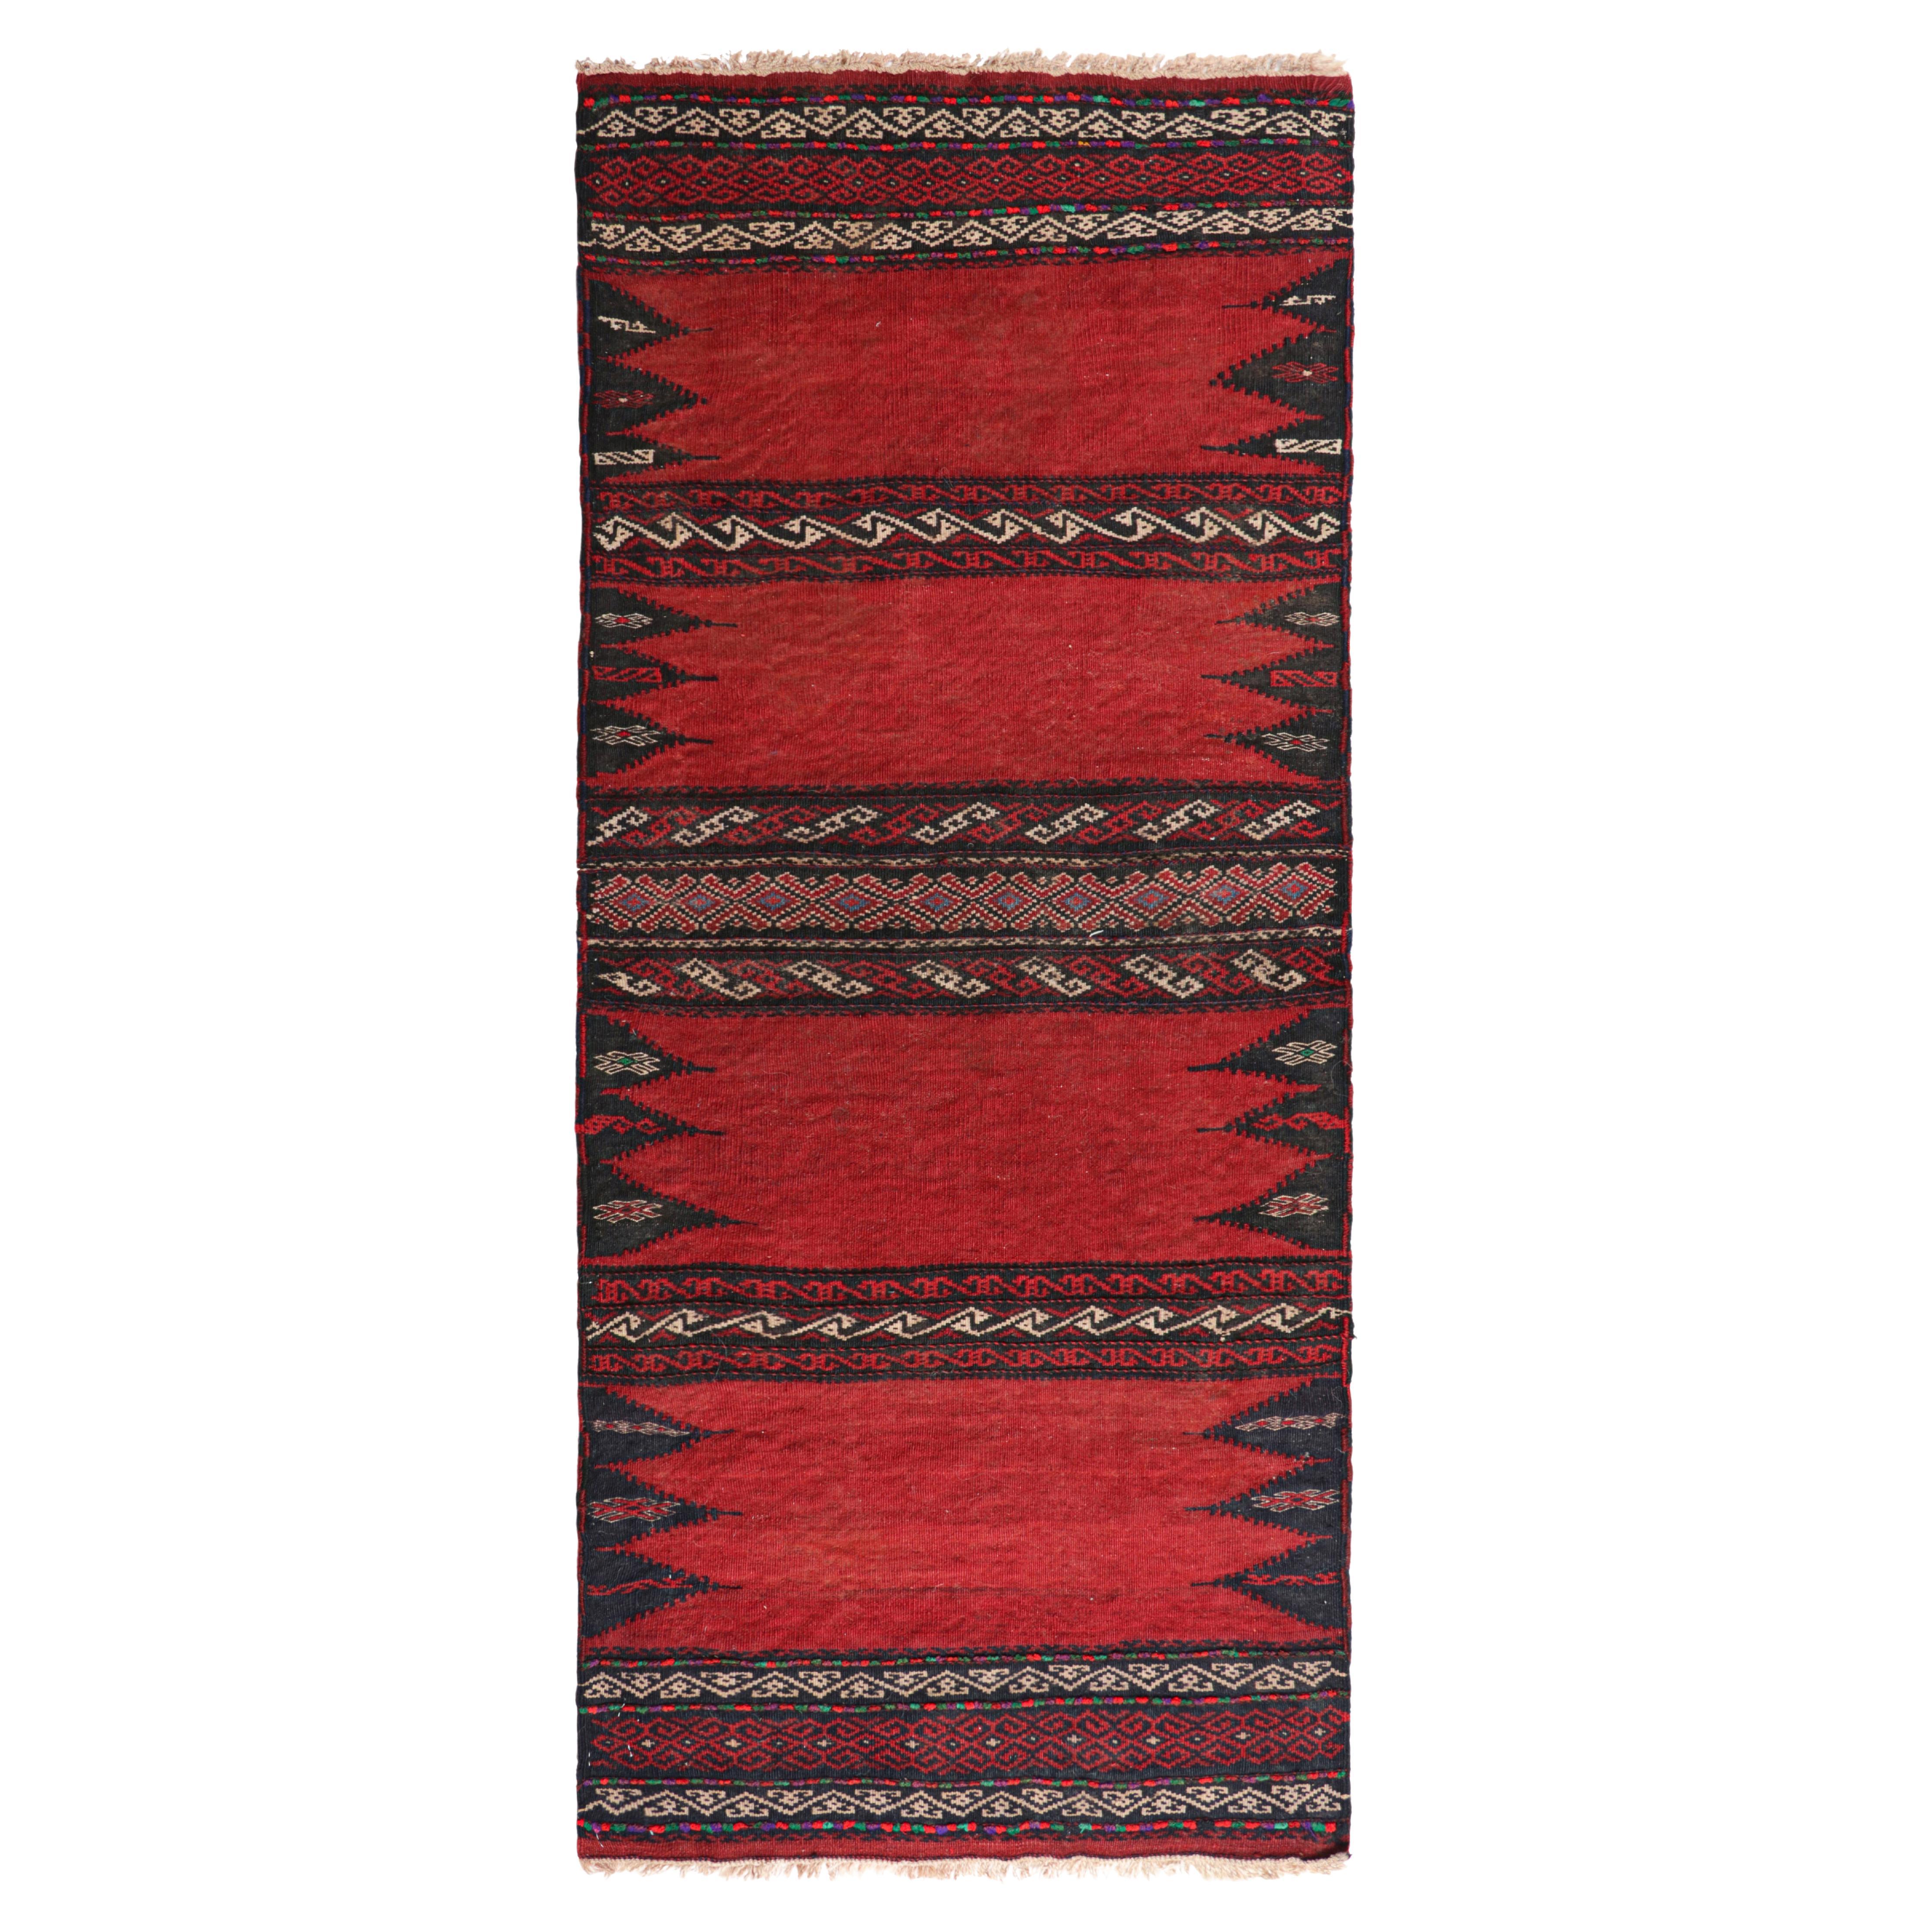 Vintage Afghan Kilim in Red with Stripes & Geometric Patterns, from Rug & Kilim For Sale